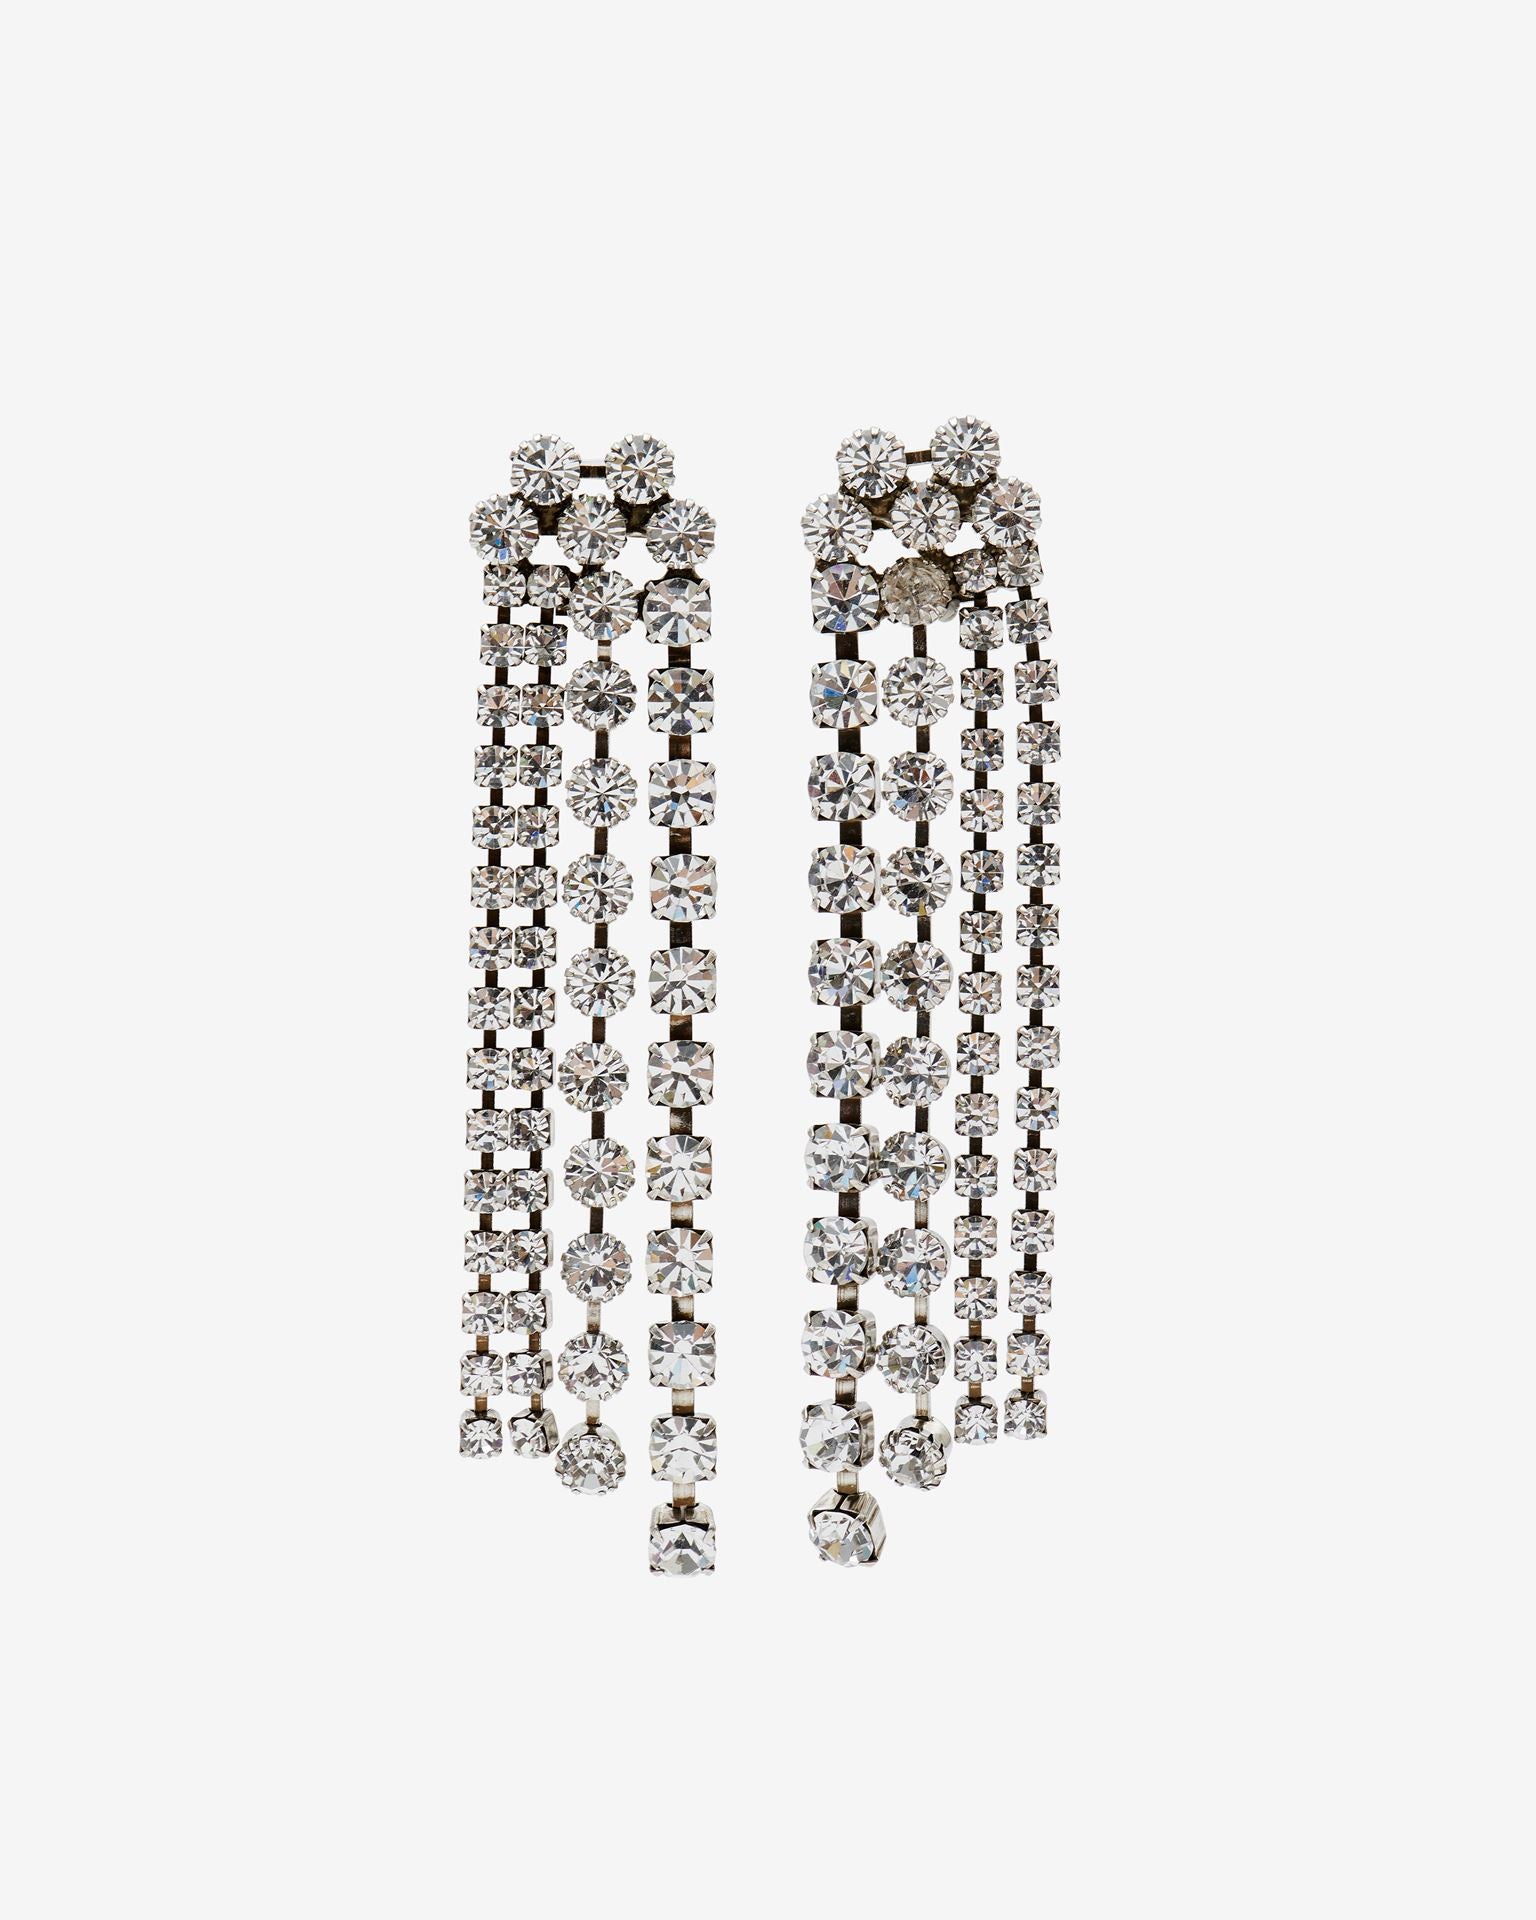 Isabel Marant Boucle D'Oreill Drop Earrings-Jewelry-TU-Misch-Vancouver-Canada